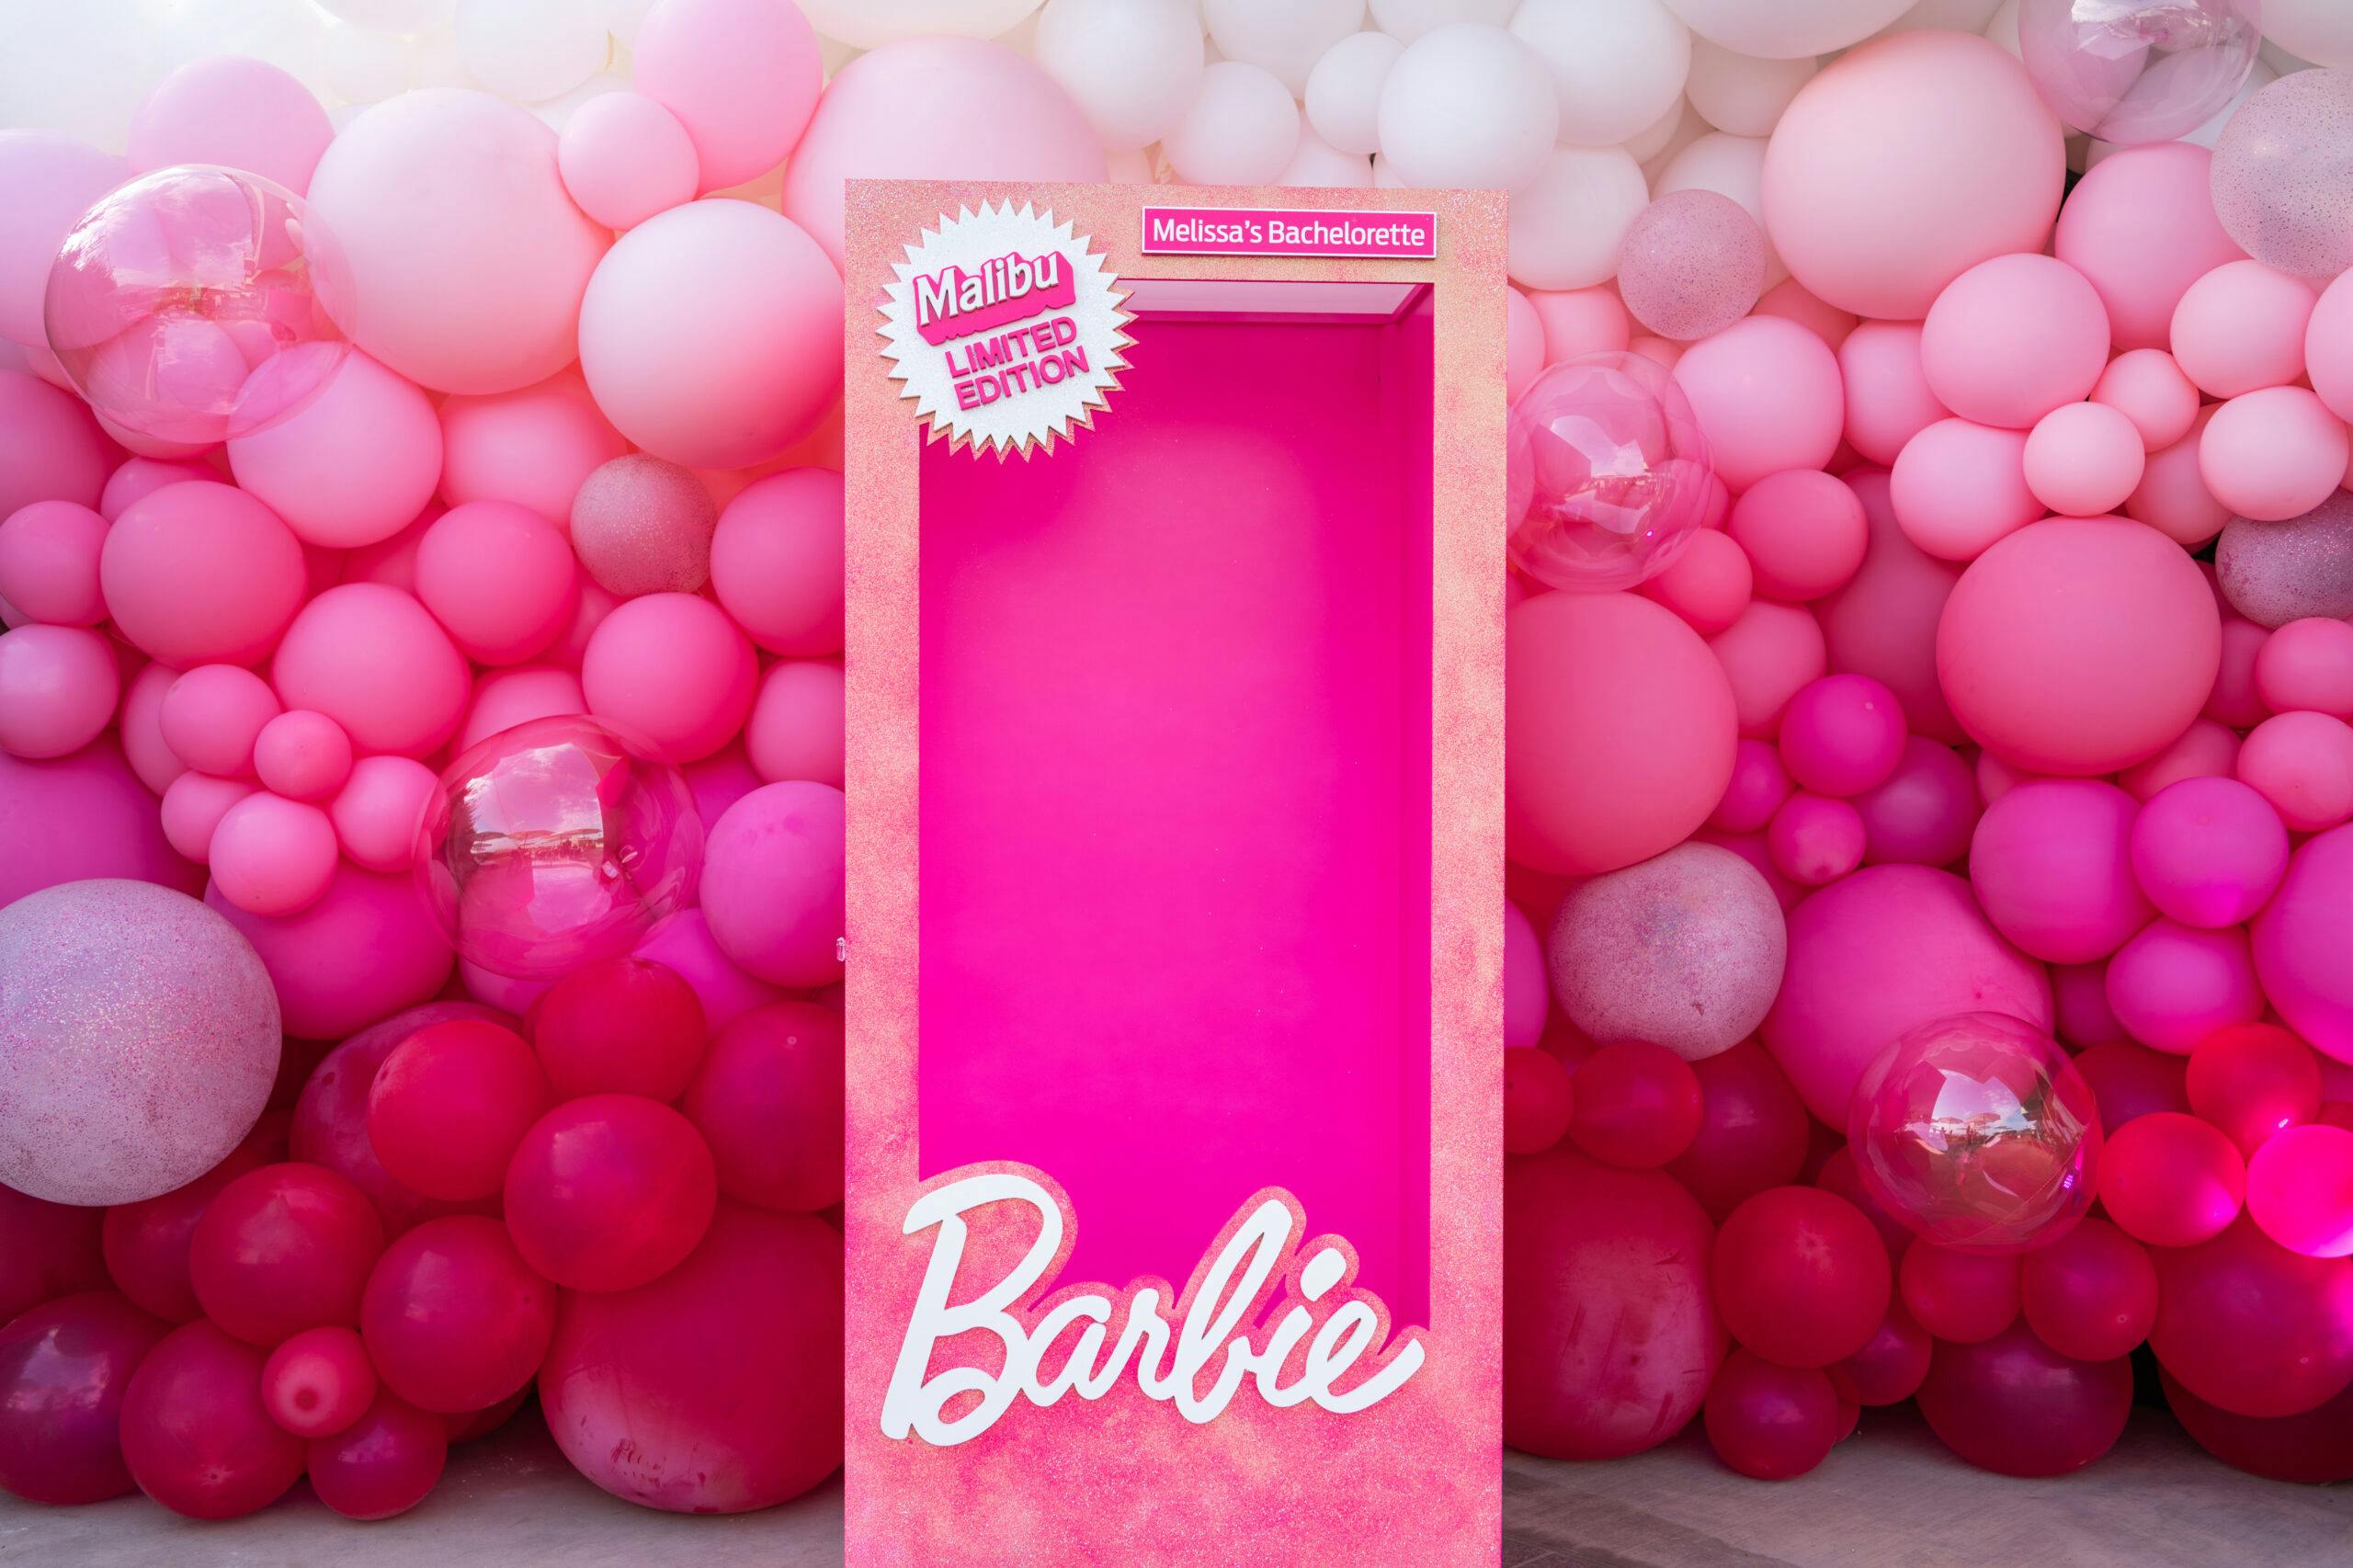 18 Barbie Theme Party Ideas For Your On-Trend Barbiecore Bash - Partyslate